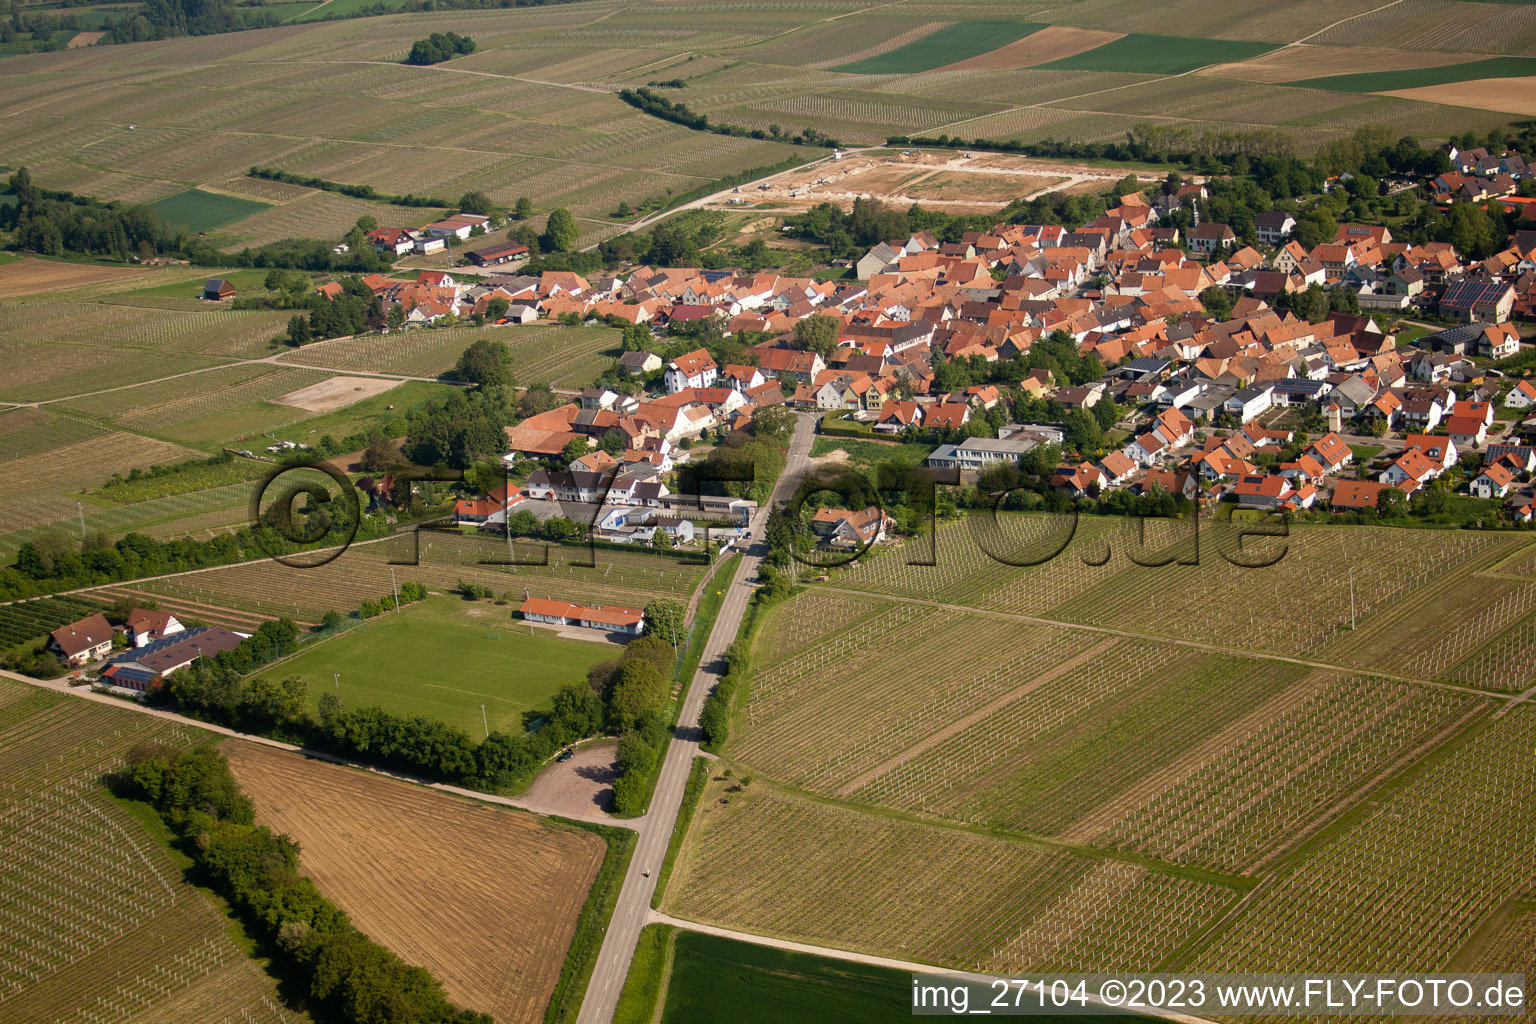 Impflingen in the state Rhineland-Palatinate, Germany from above